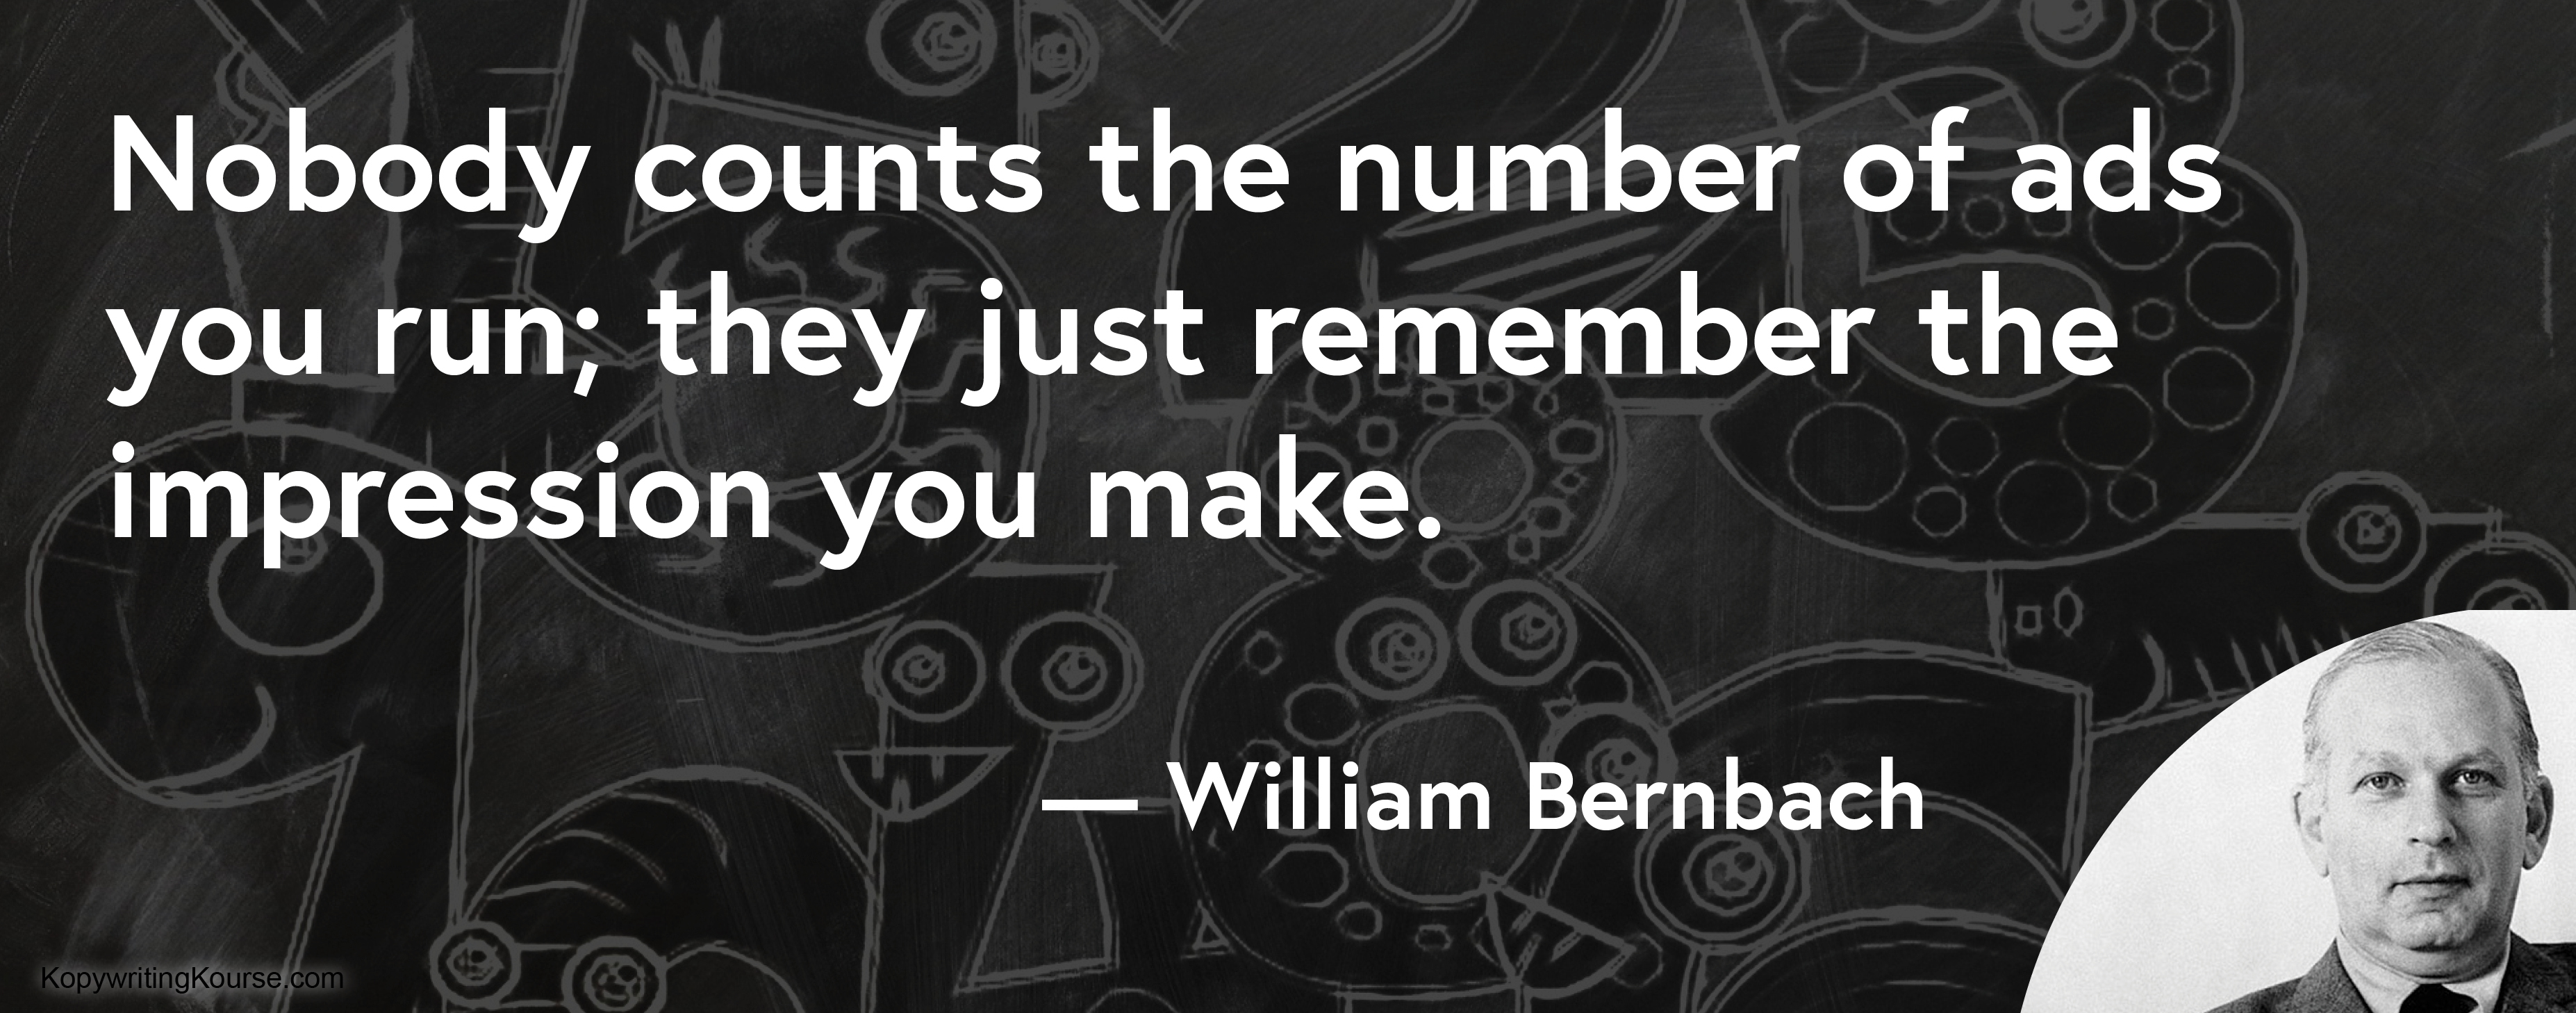 Bill bernbach quote on remember the impression